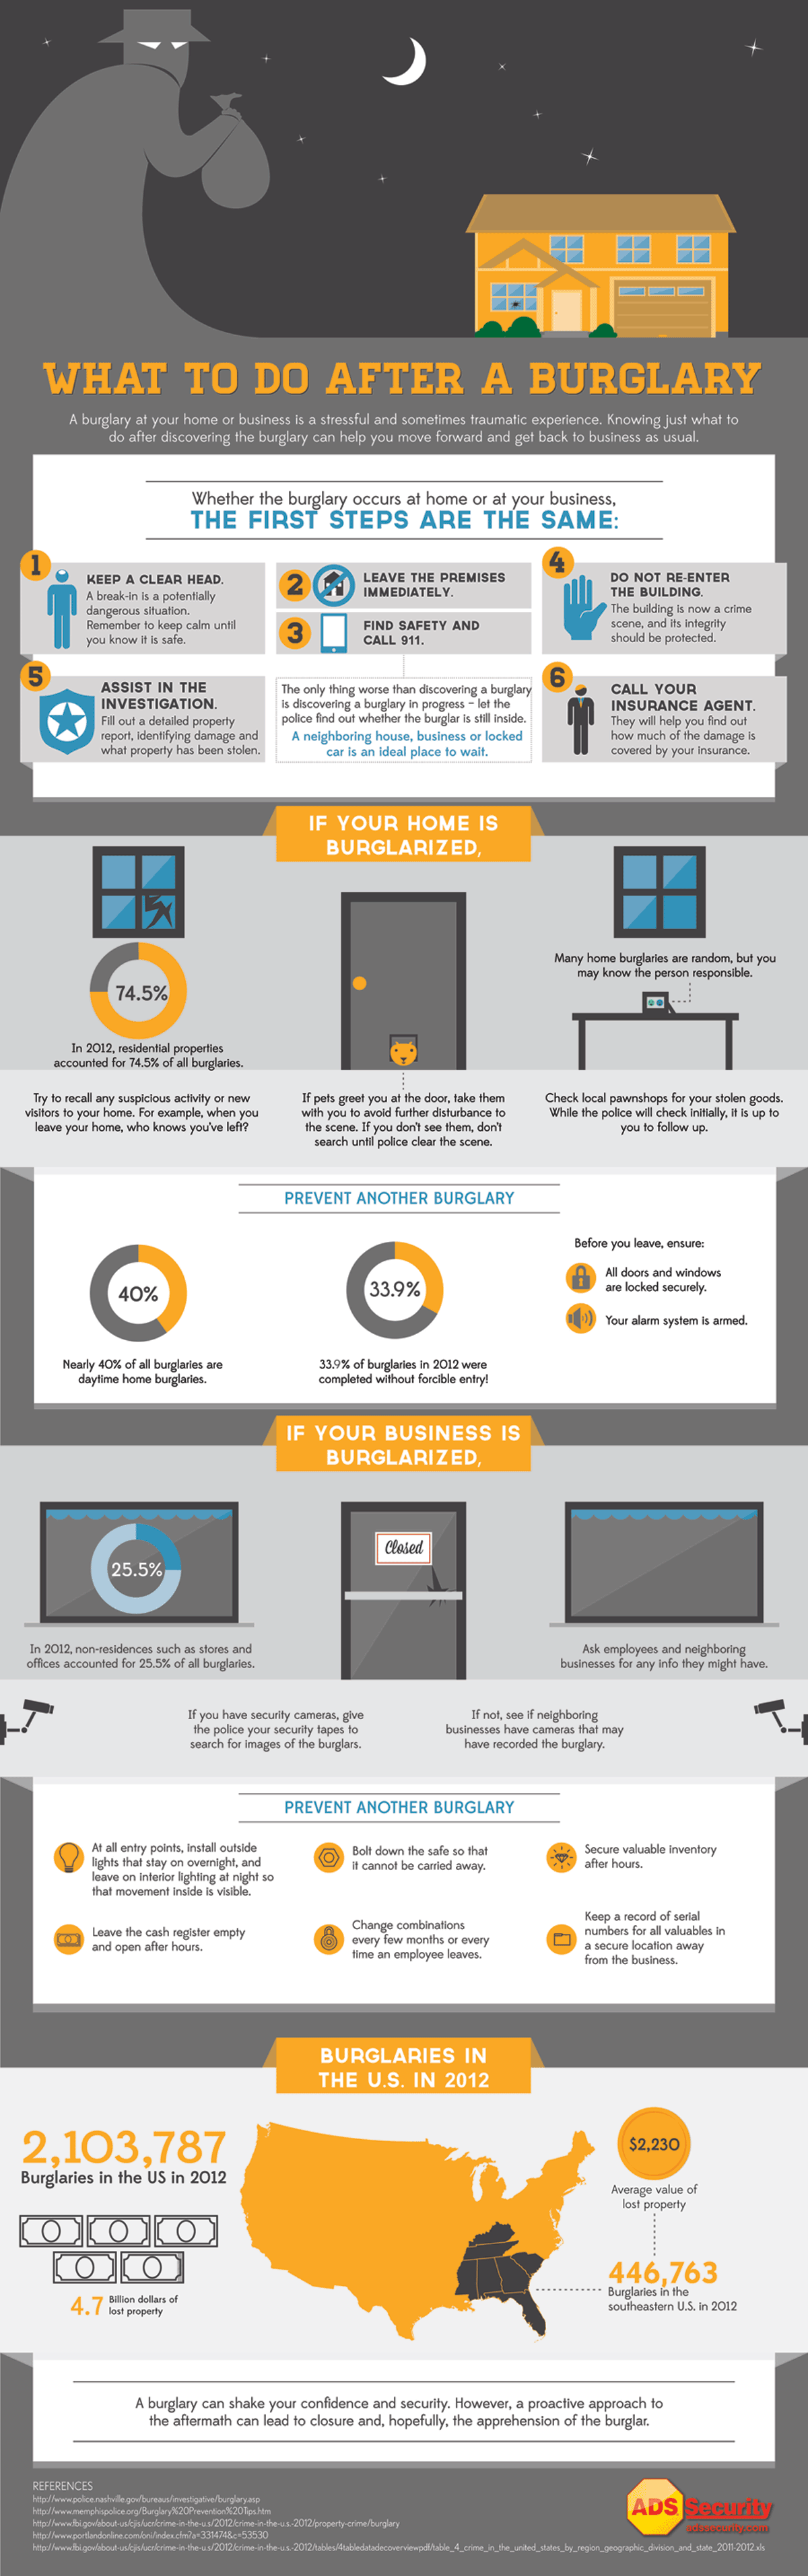 ADS Security Unveils Infographic Detailing What to do When a Burglary Happens to You